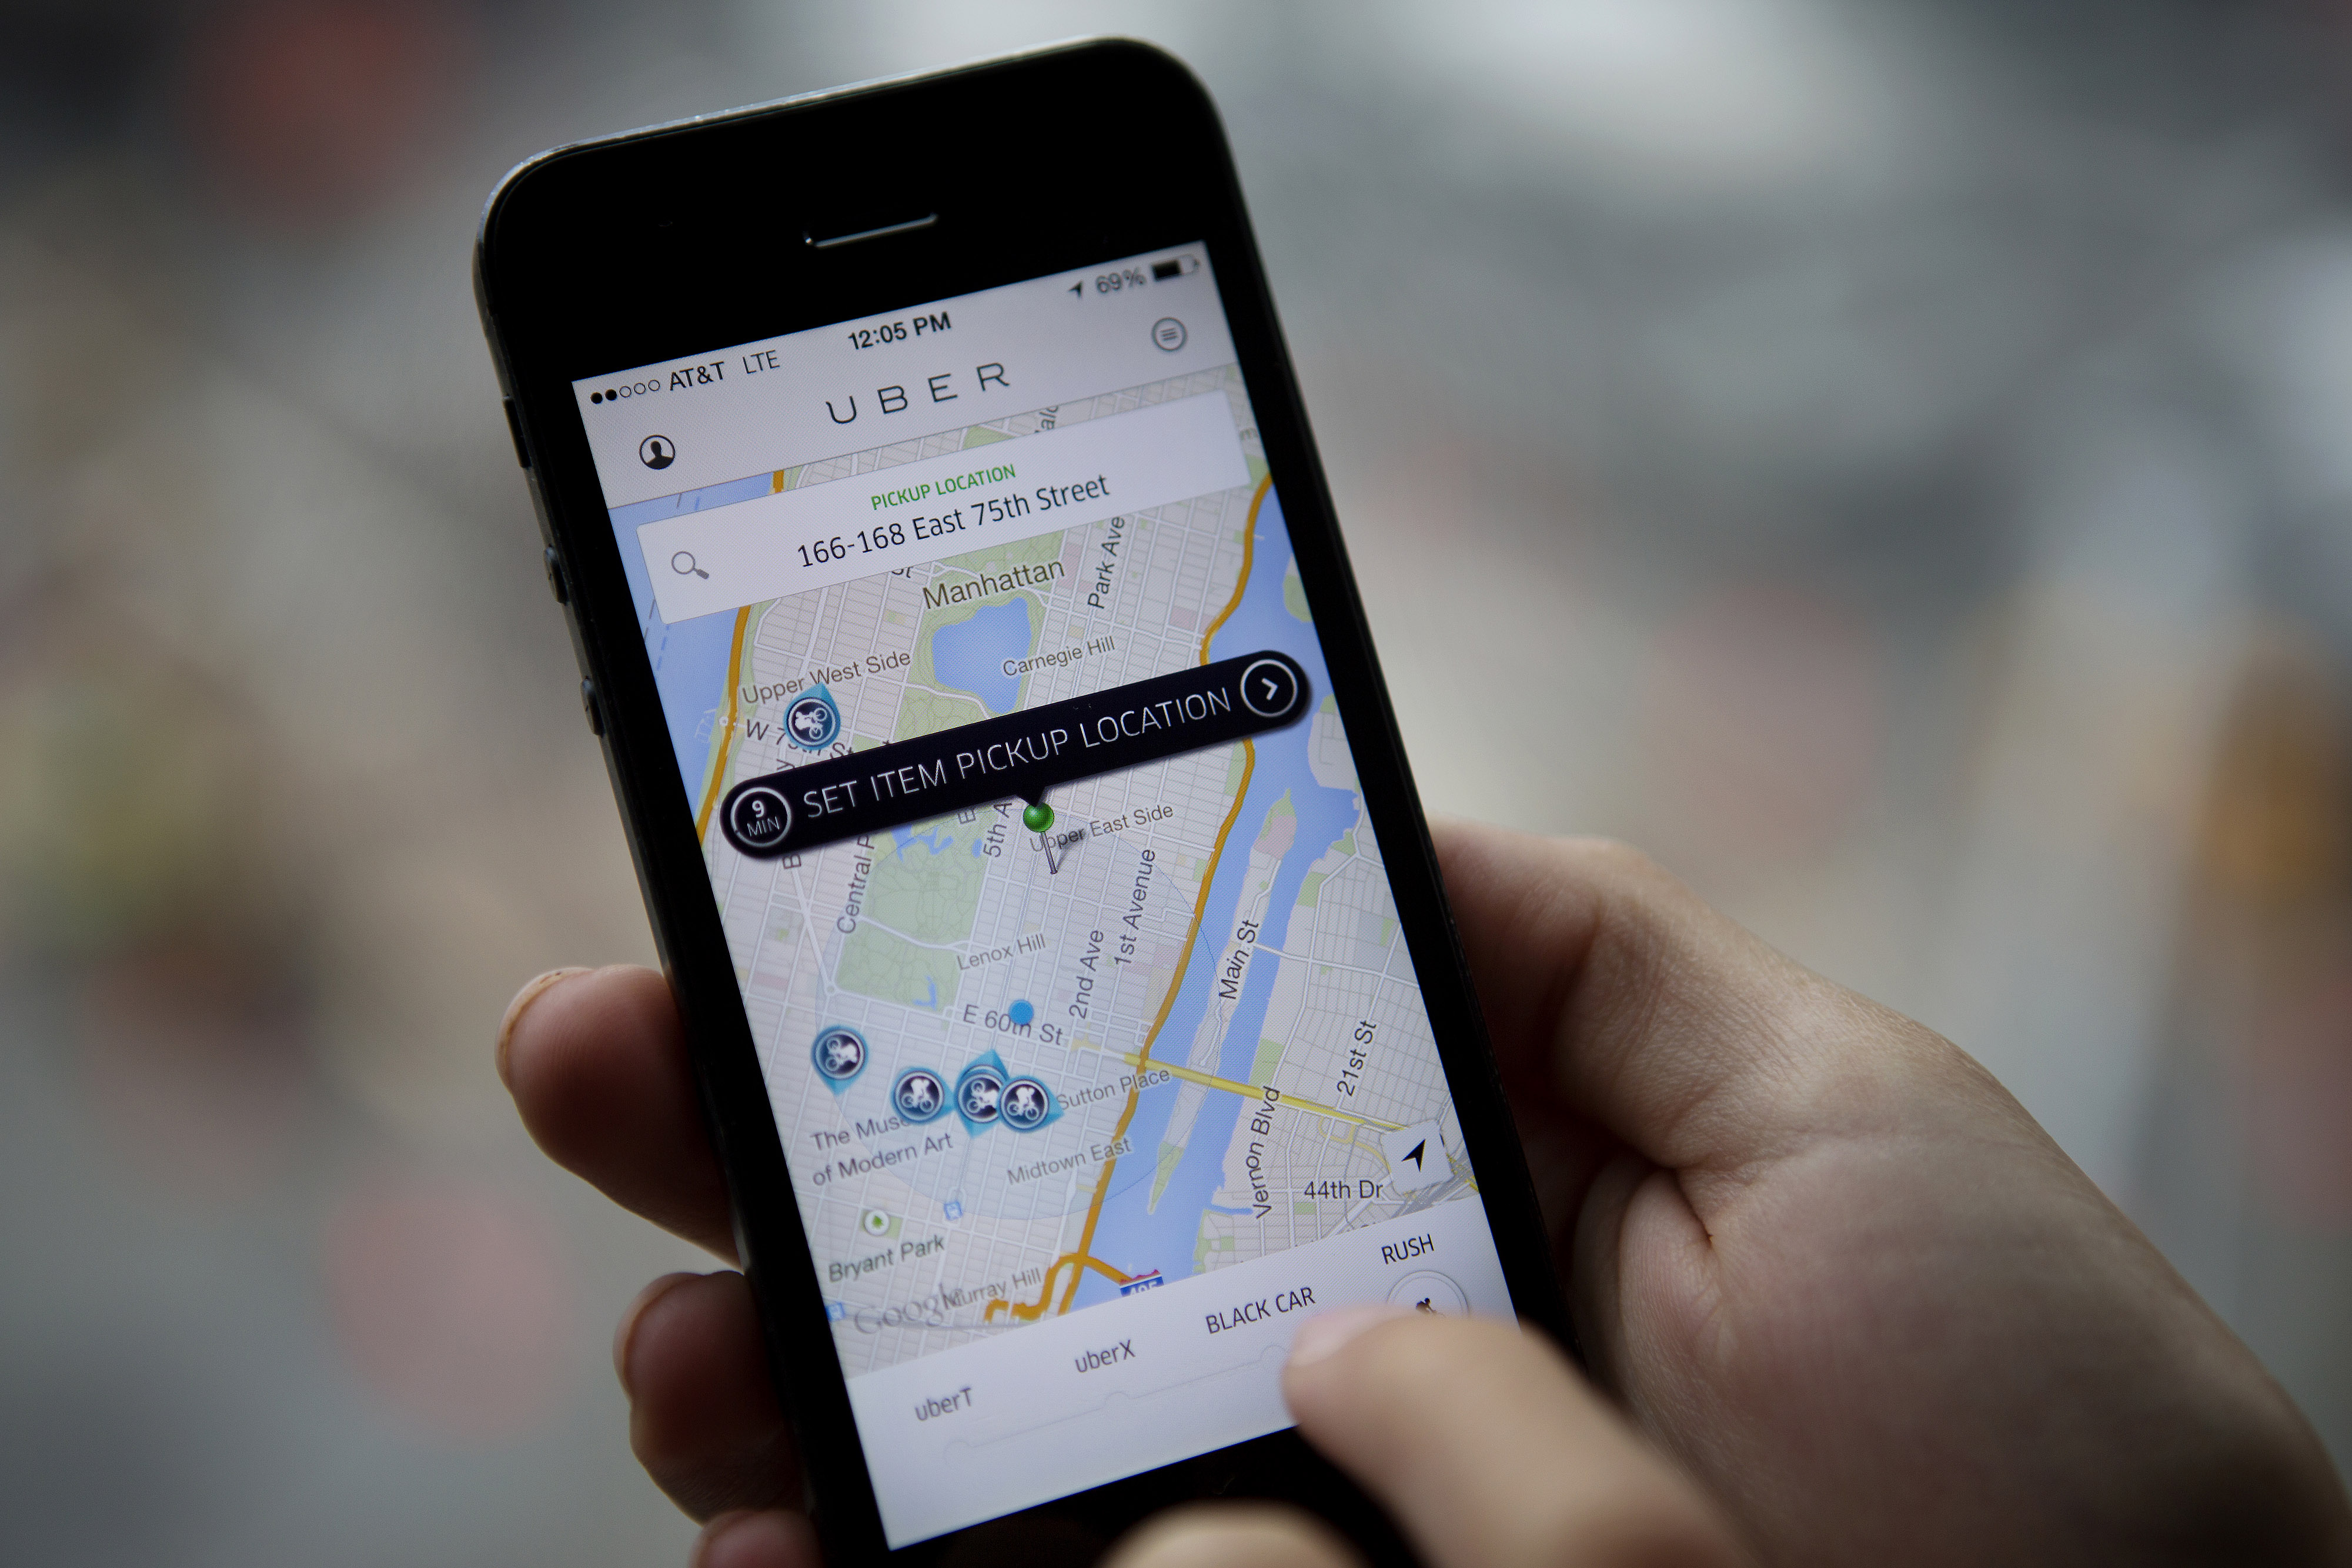 Th Uber Technologies Inc. car service app is demonstrated for a photograph on an Apple Inc. iPhone in New York, U.S., on Wednesday, Aug. 6, 2014. (Bloomberg&mdash;Bloomberg via Getty Images)